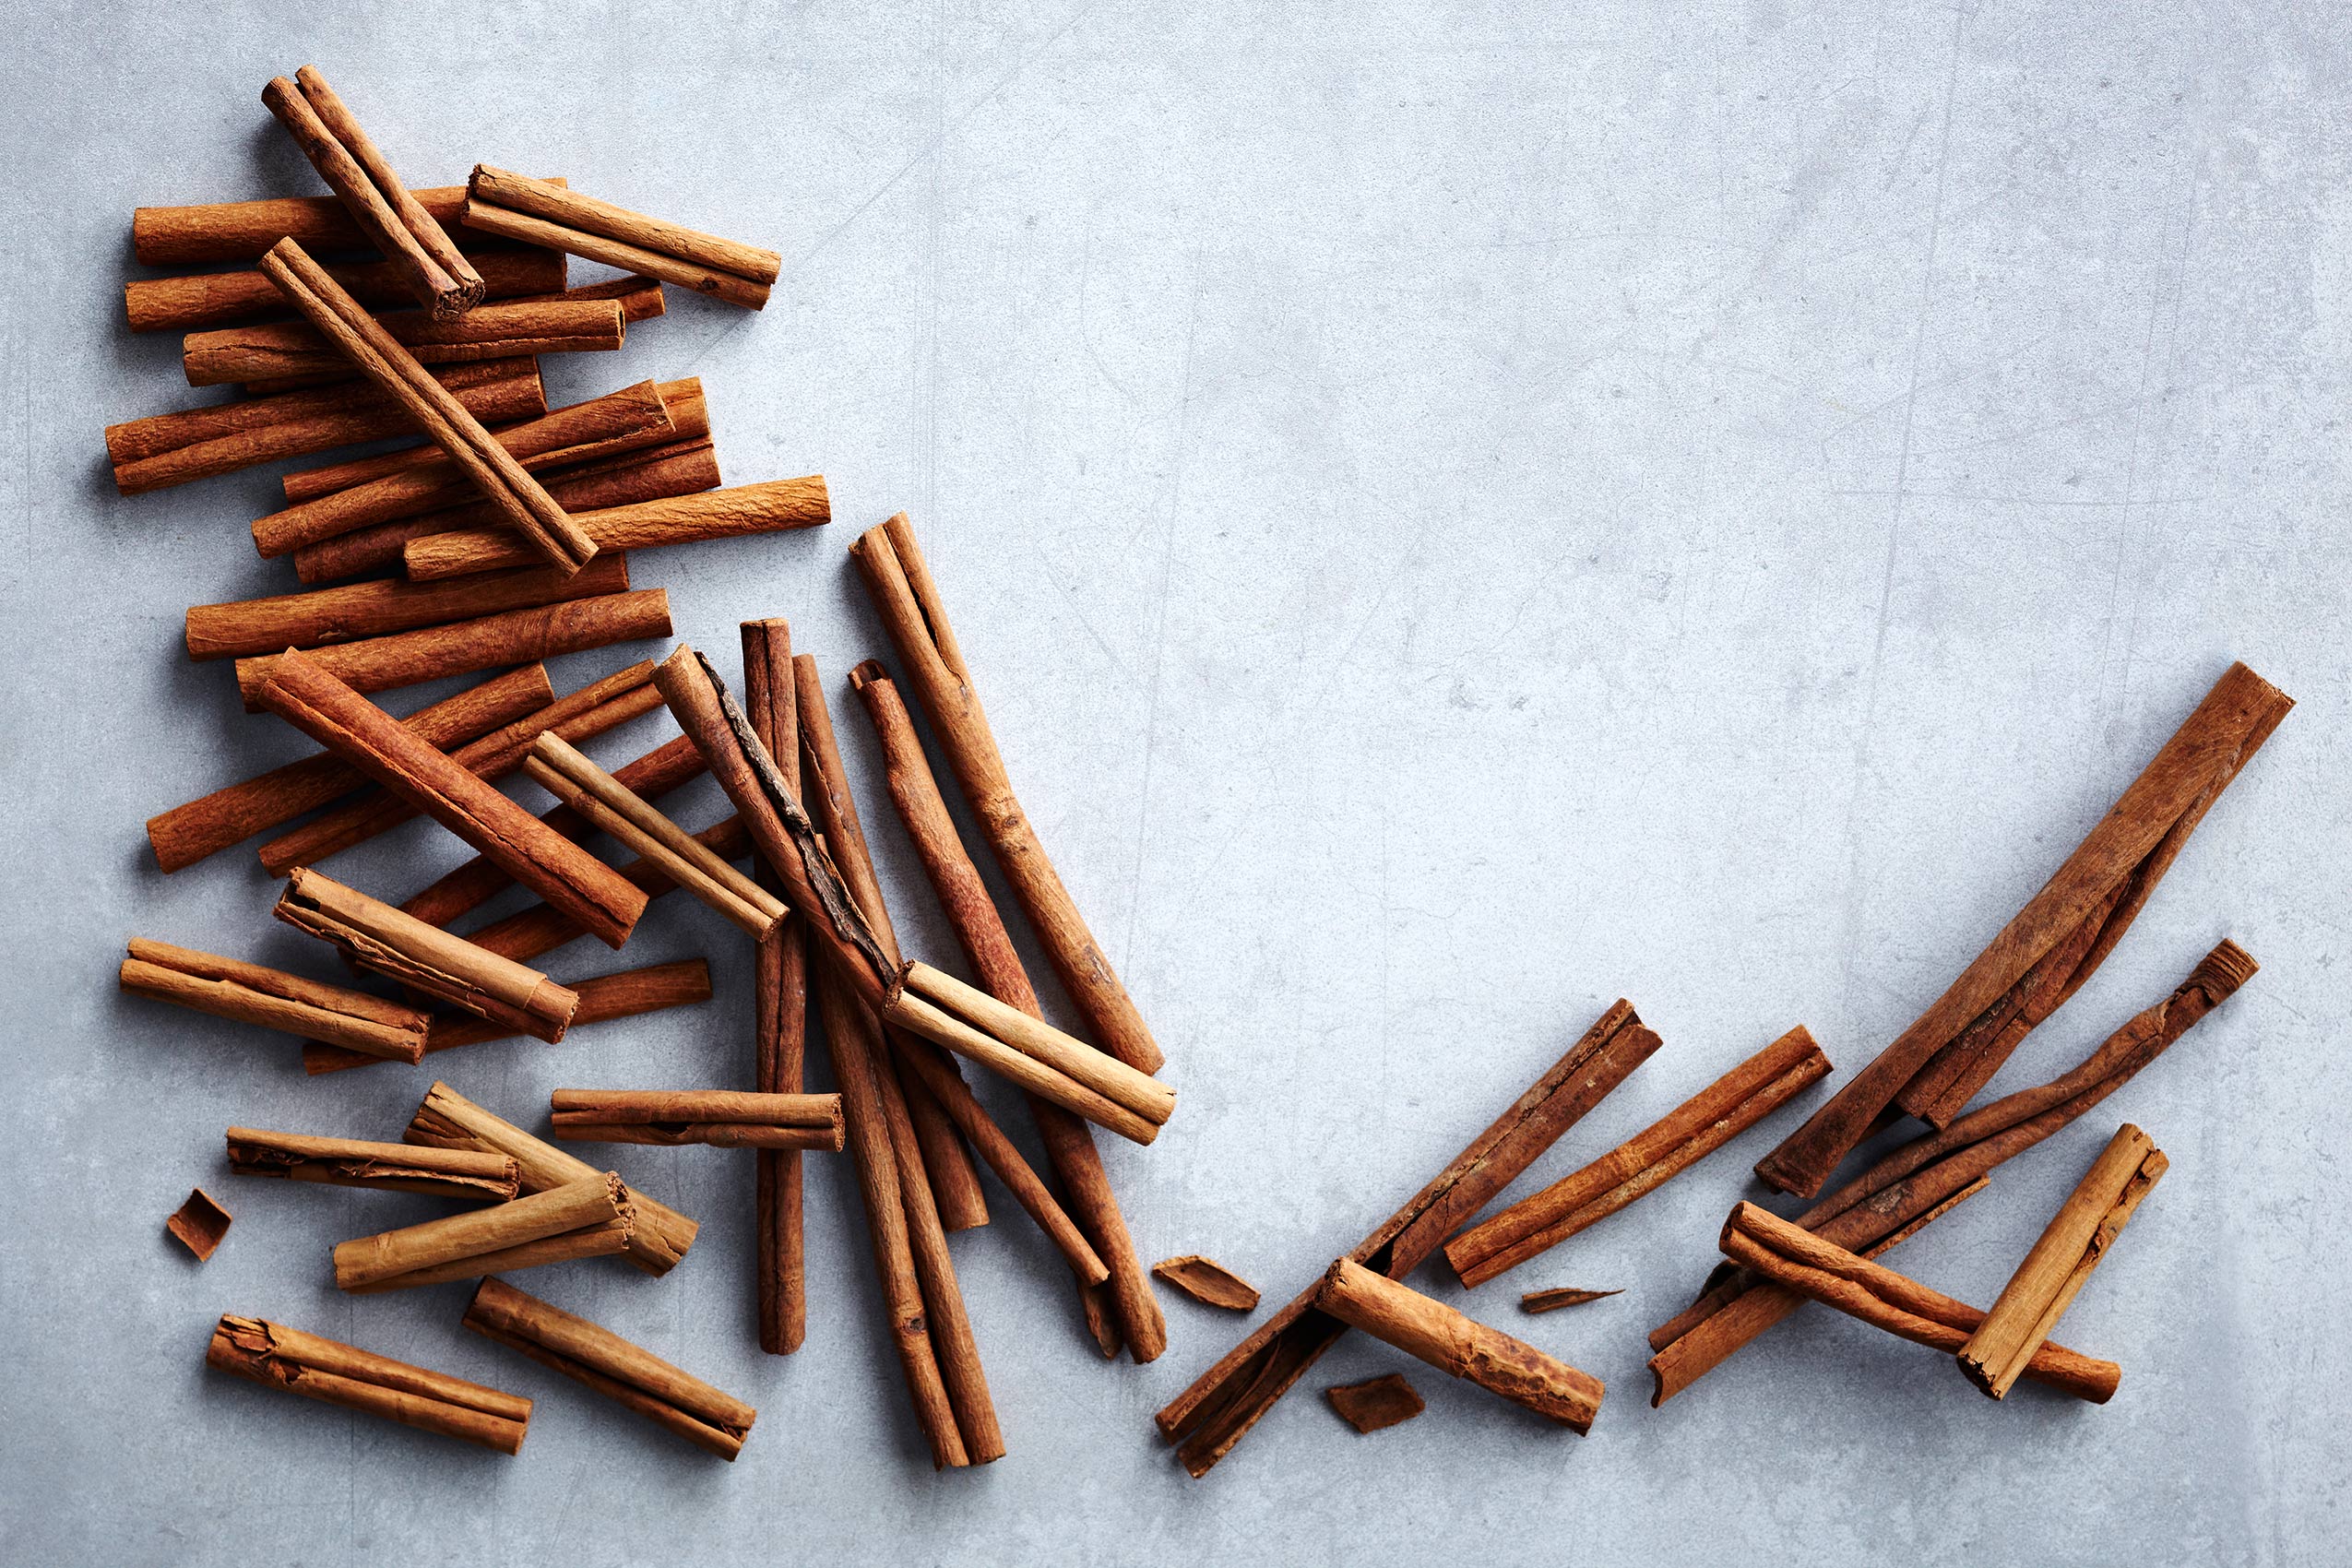 Spice Health Heroes • Whole Dried Cinnamon Sticks on Light Stone Counter • Cookbook & Editorial Food Photography